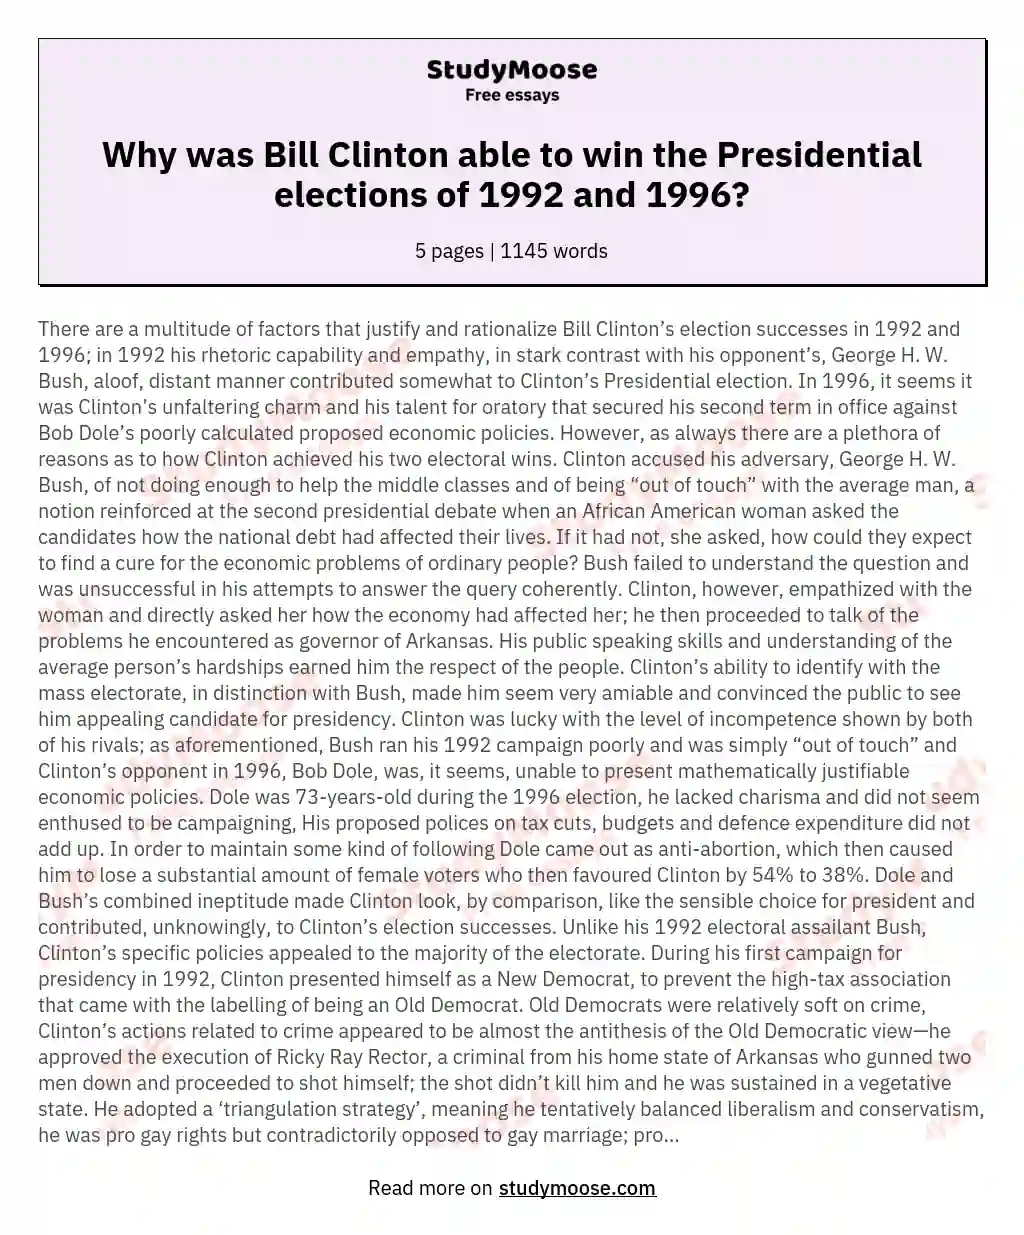 Why was Bill Clinton able to win the Presidential elections of 1992 and 1996? essay